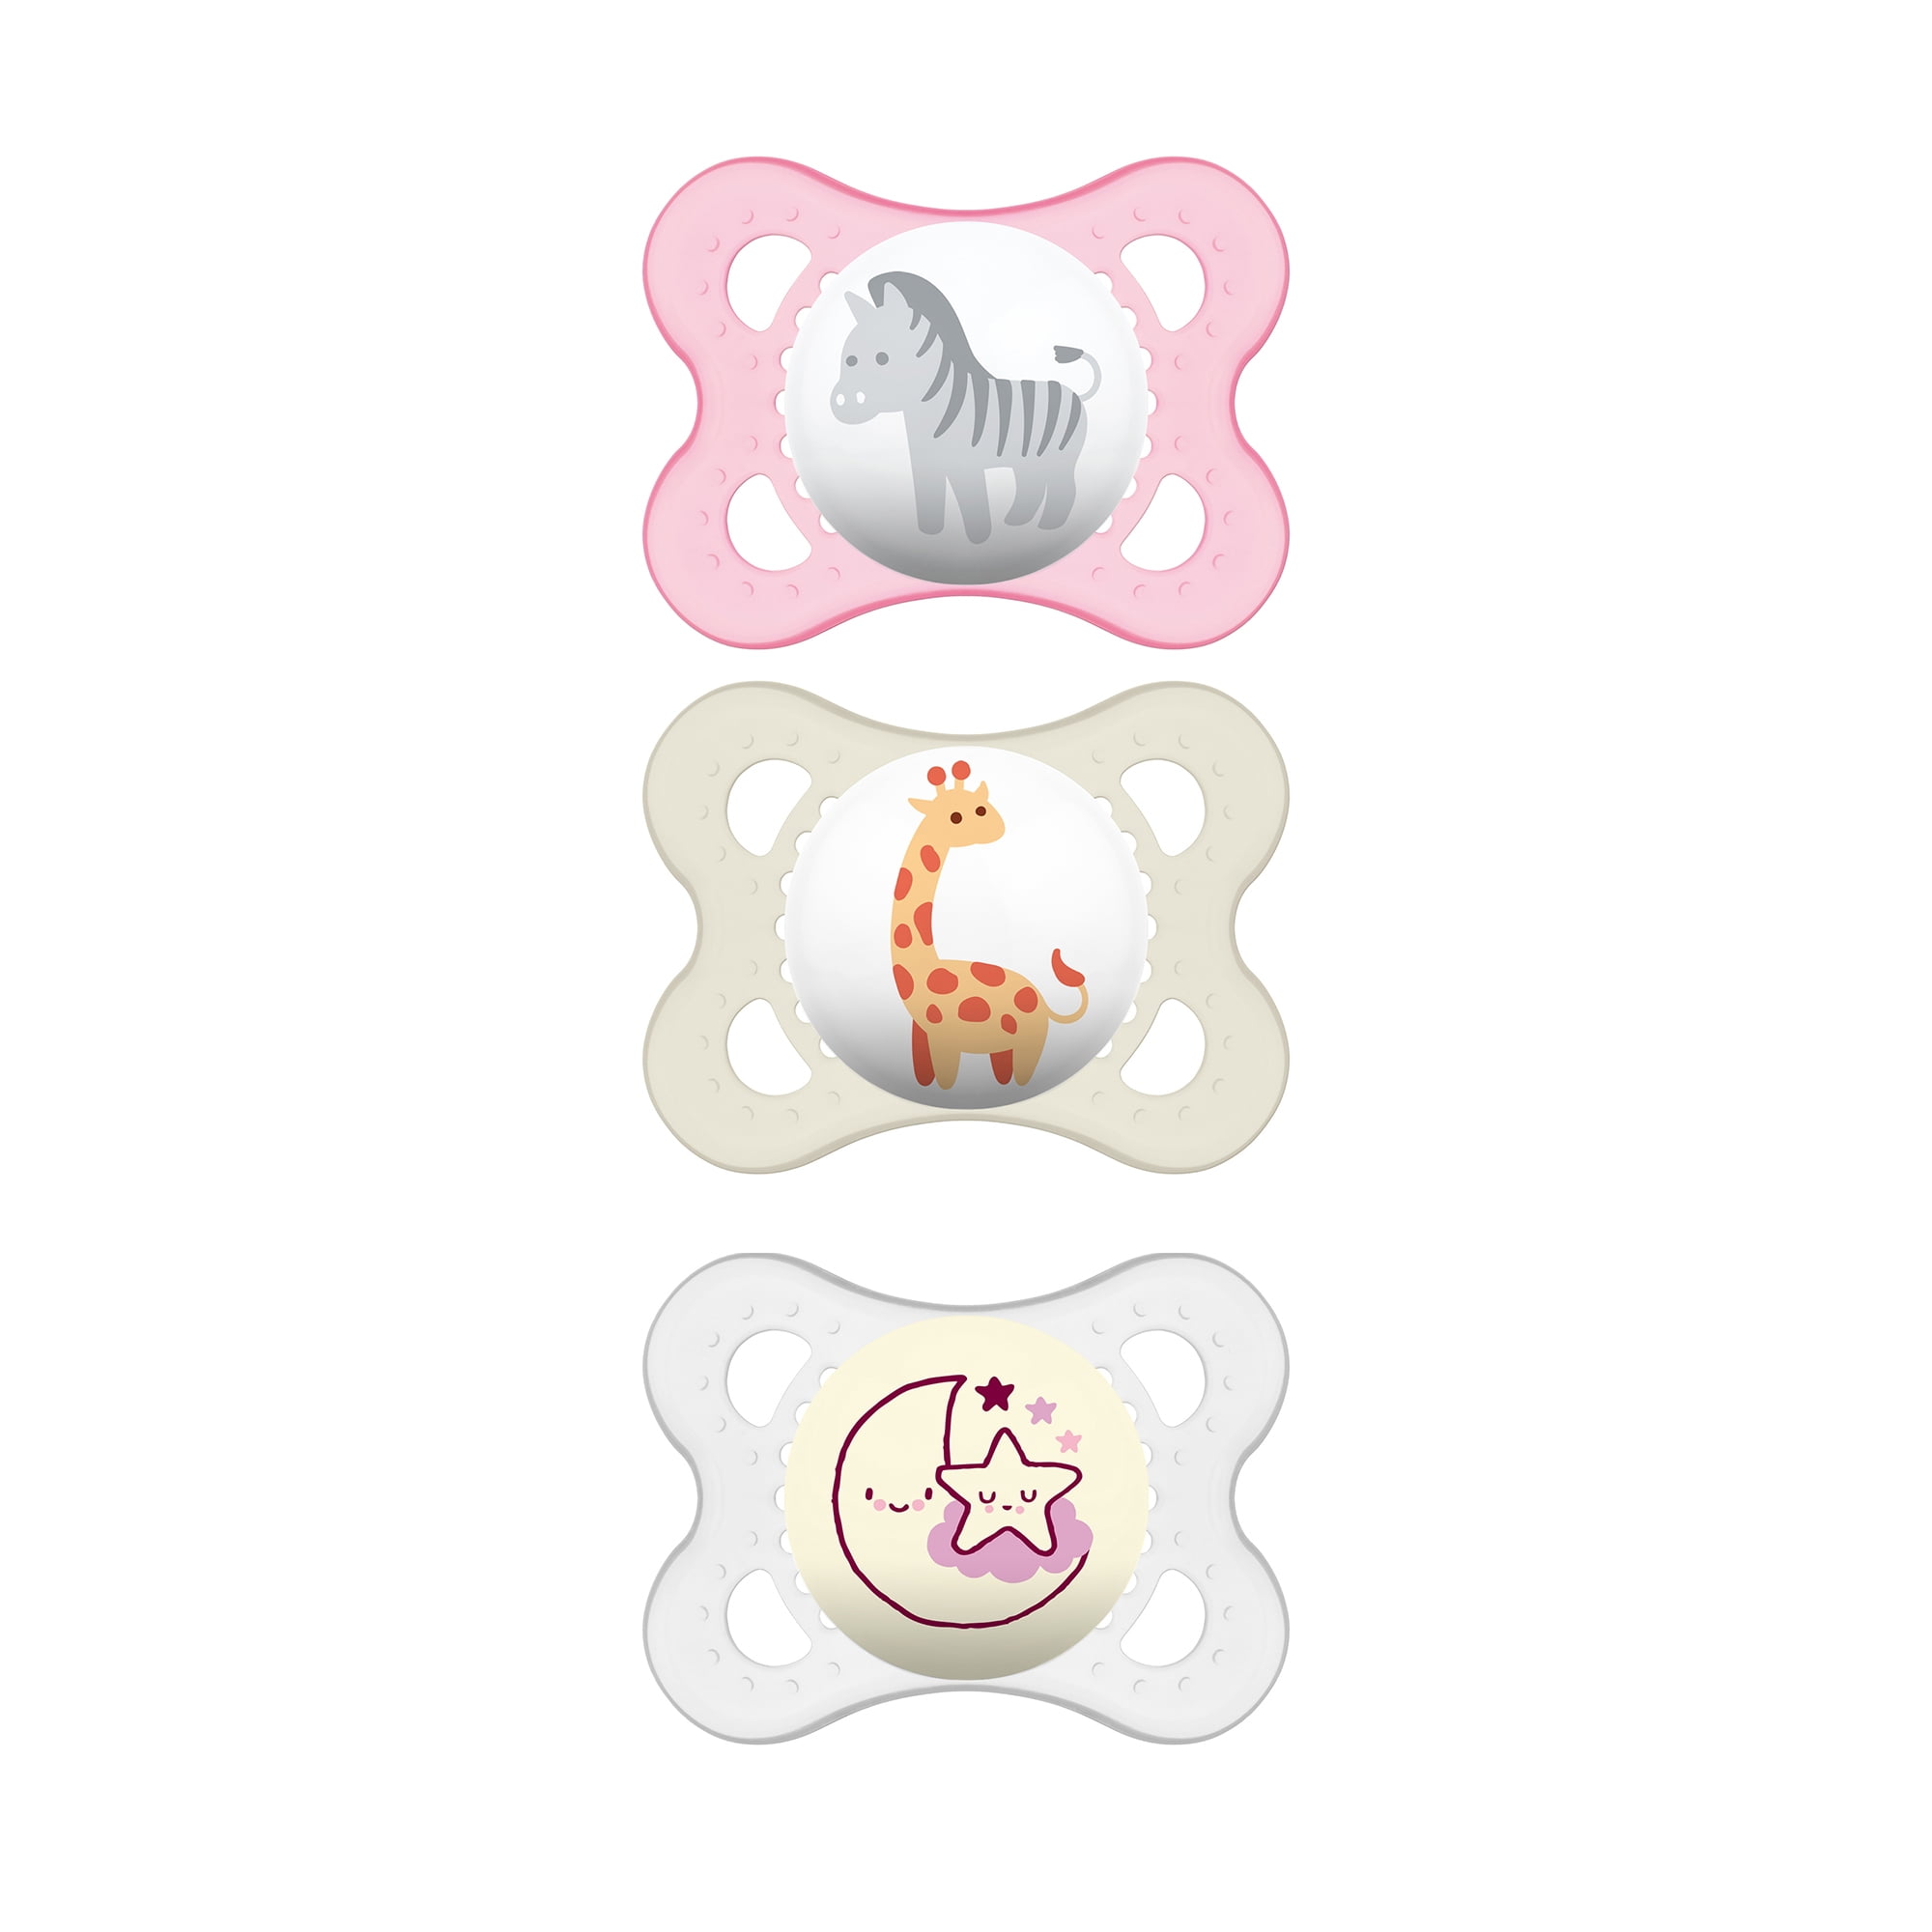 Baby Pacifier 0-6 Months Best Pacifier For Breastfed Babies ‘ Mam Pacifiers 